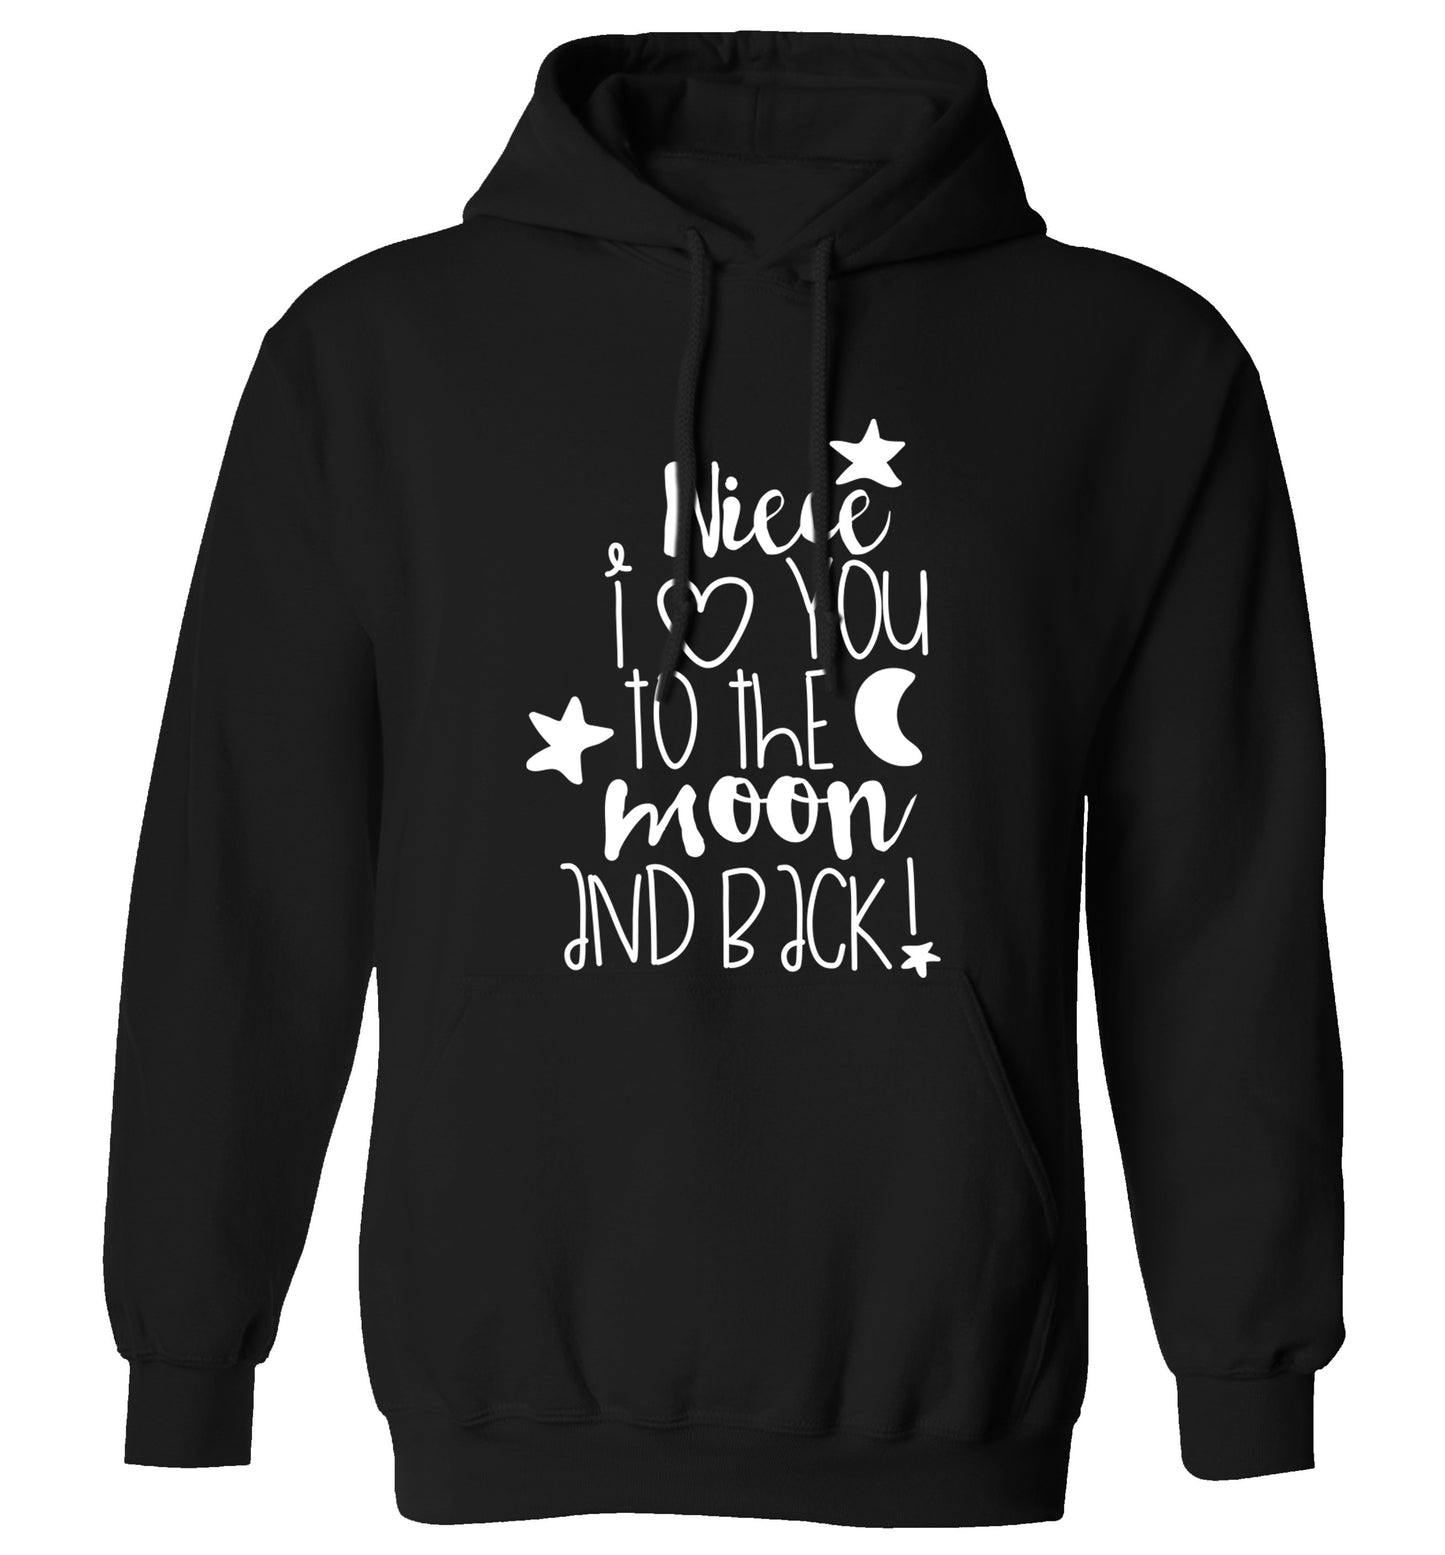 Niece I love you to the moon and back adults unisex black hoodie 2XL